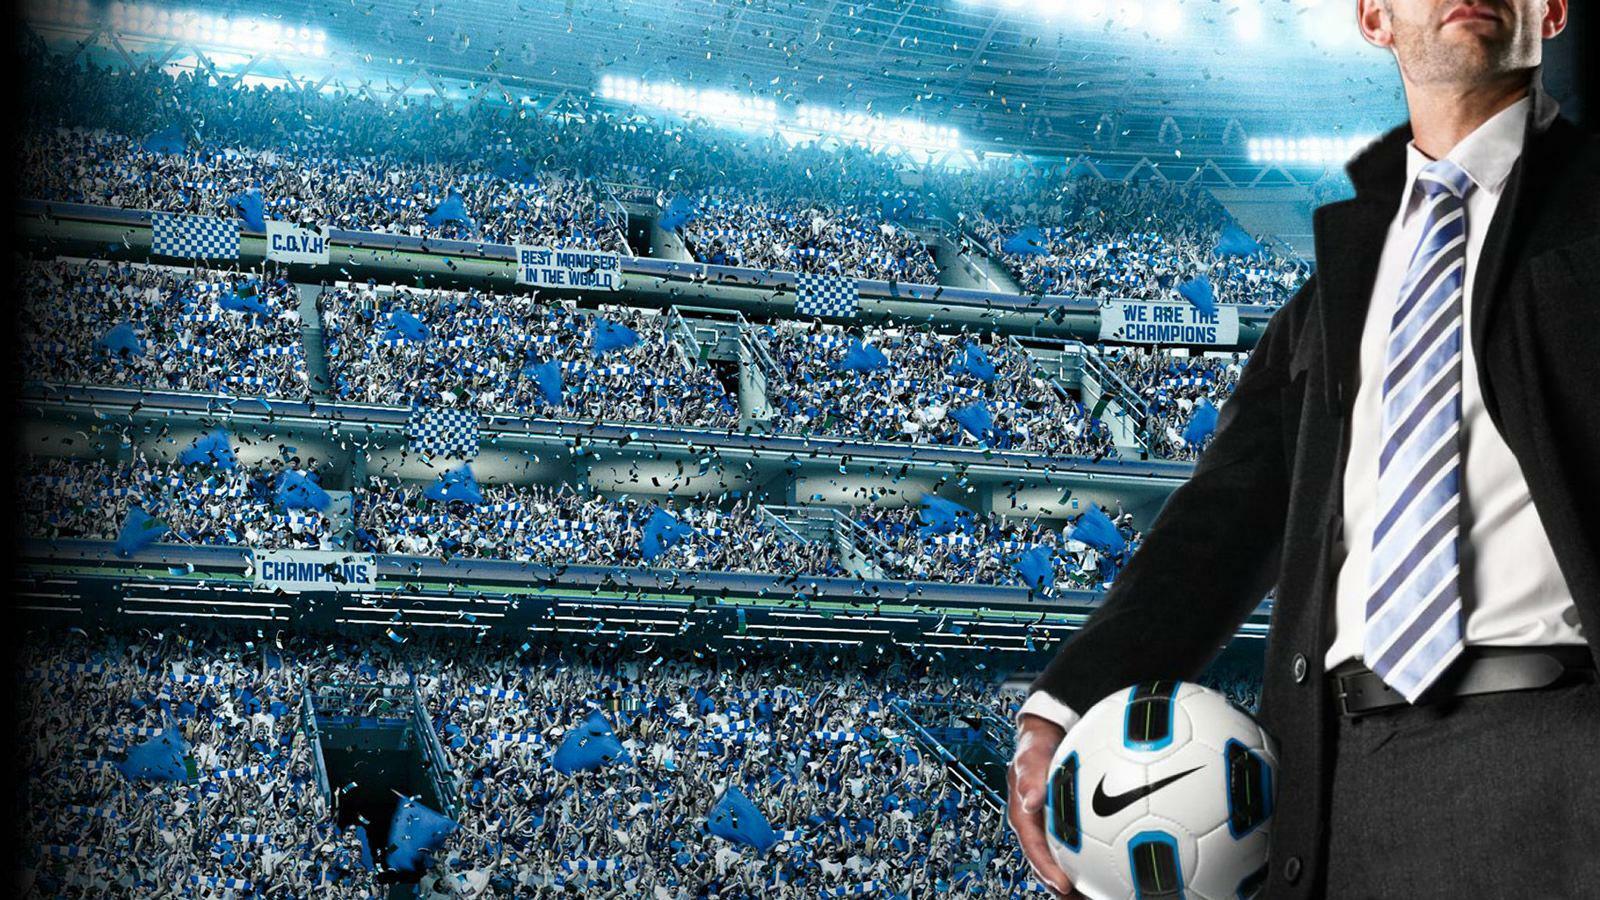 Football managers games. Football Manager 2022. Футбол менеджер. Футбол менеджер 2011. Футбольный менеджер фон.